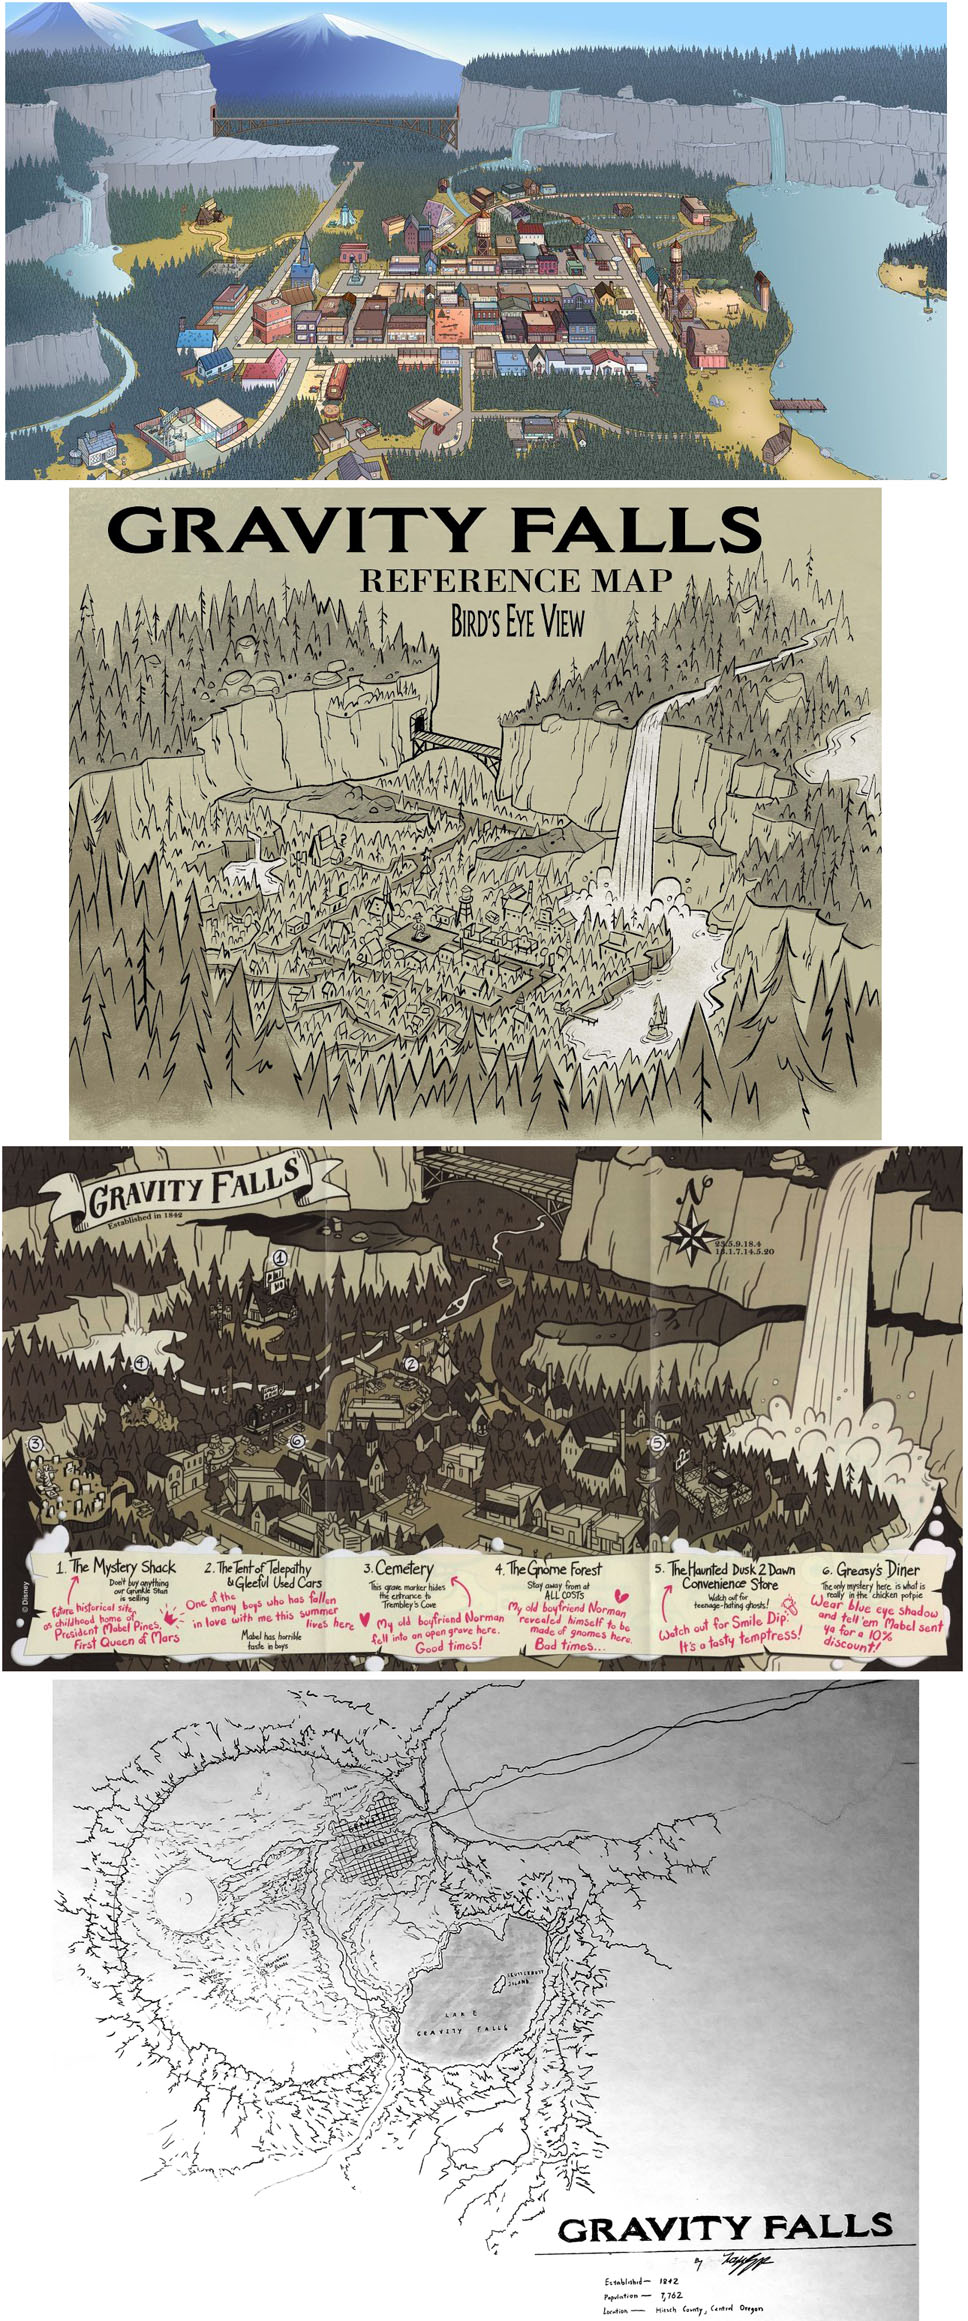 Mapping the Gravity Falls town site and surrounding area | Fandom